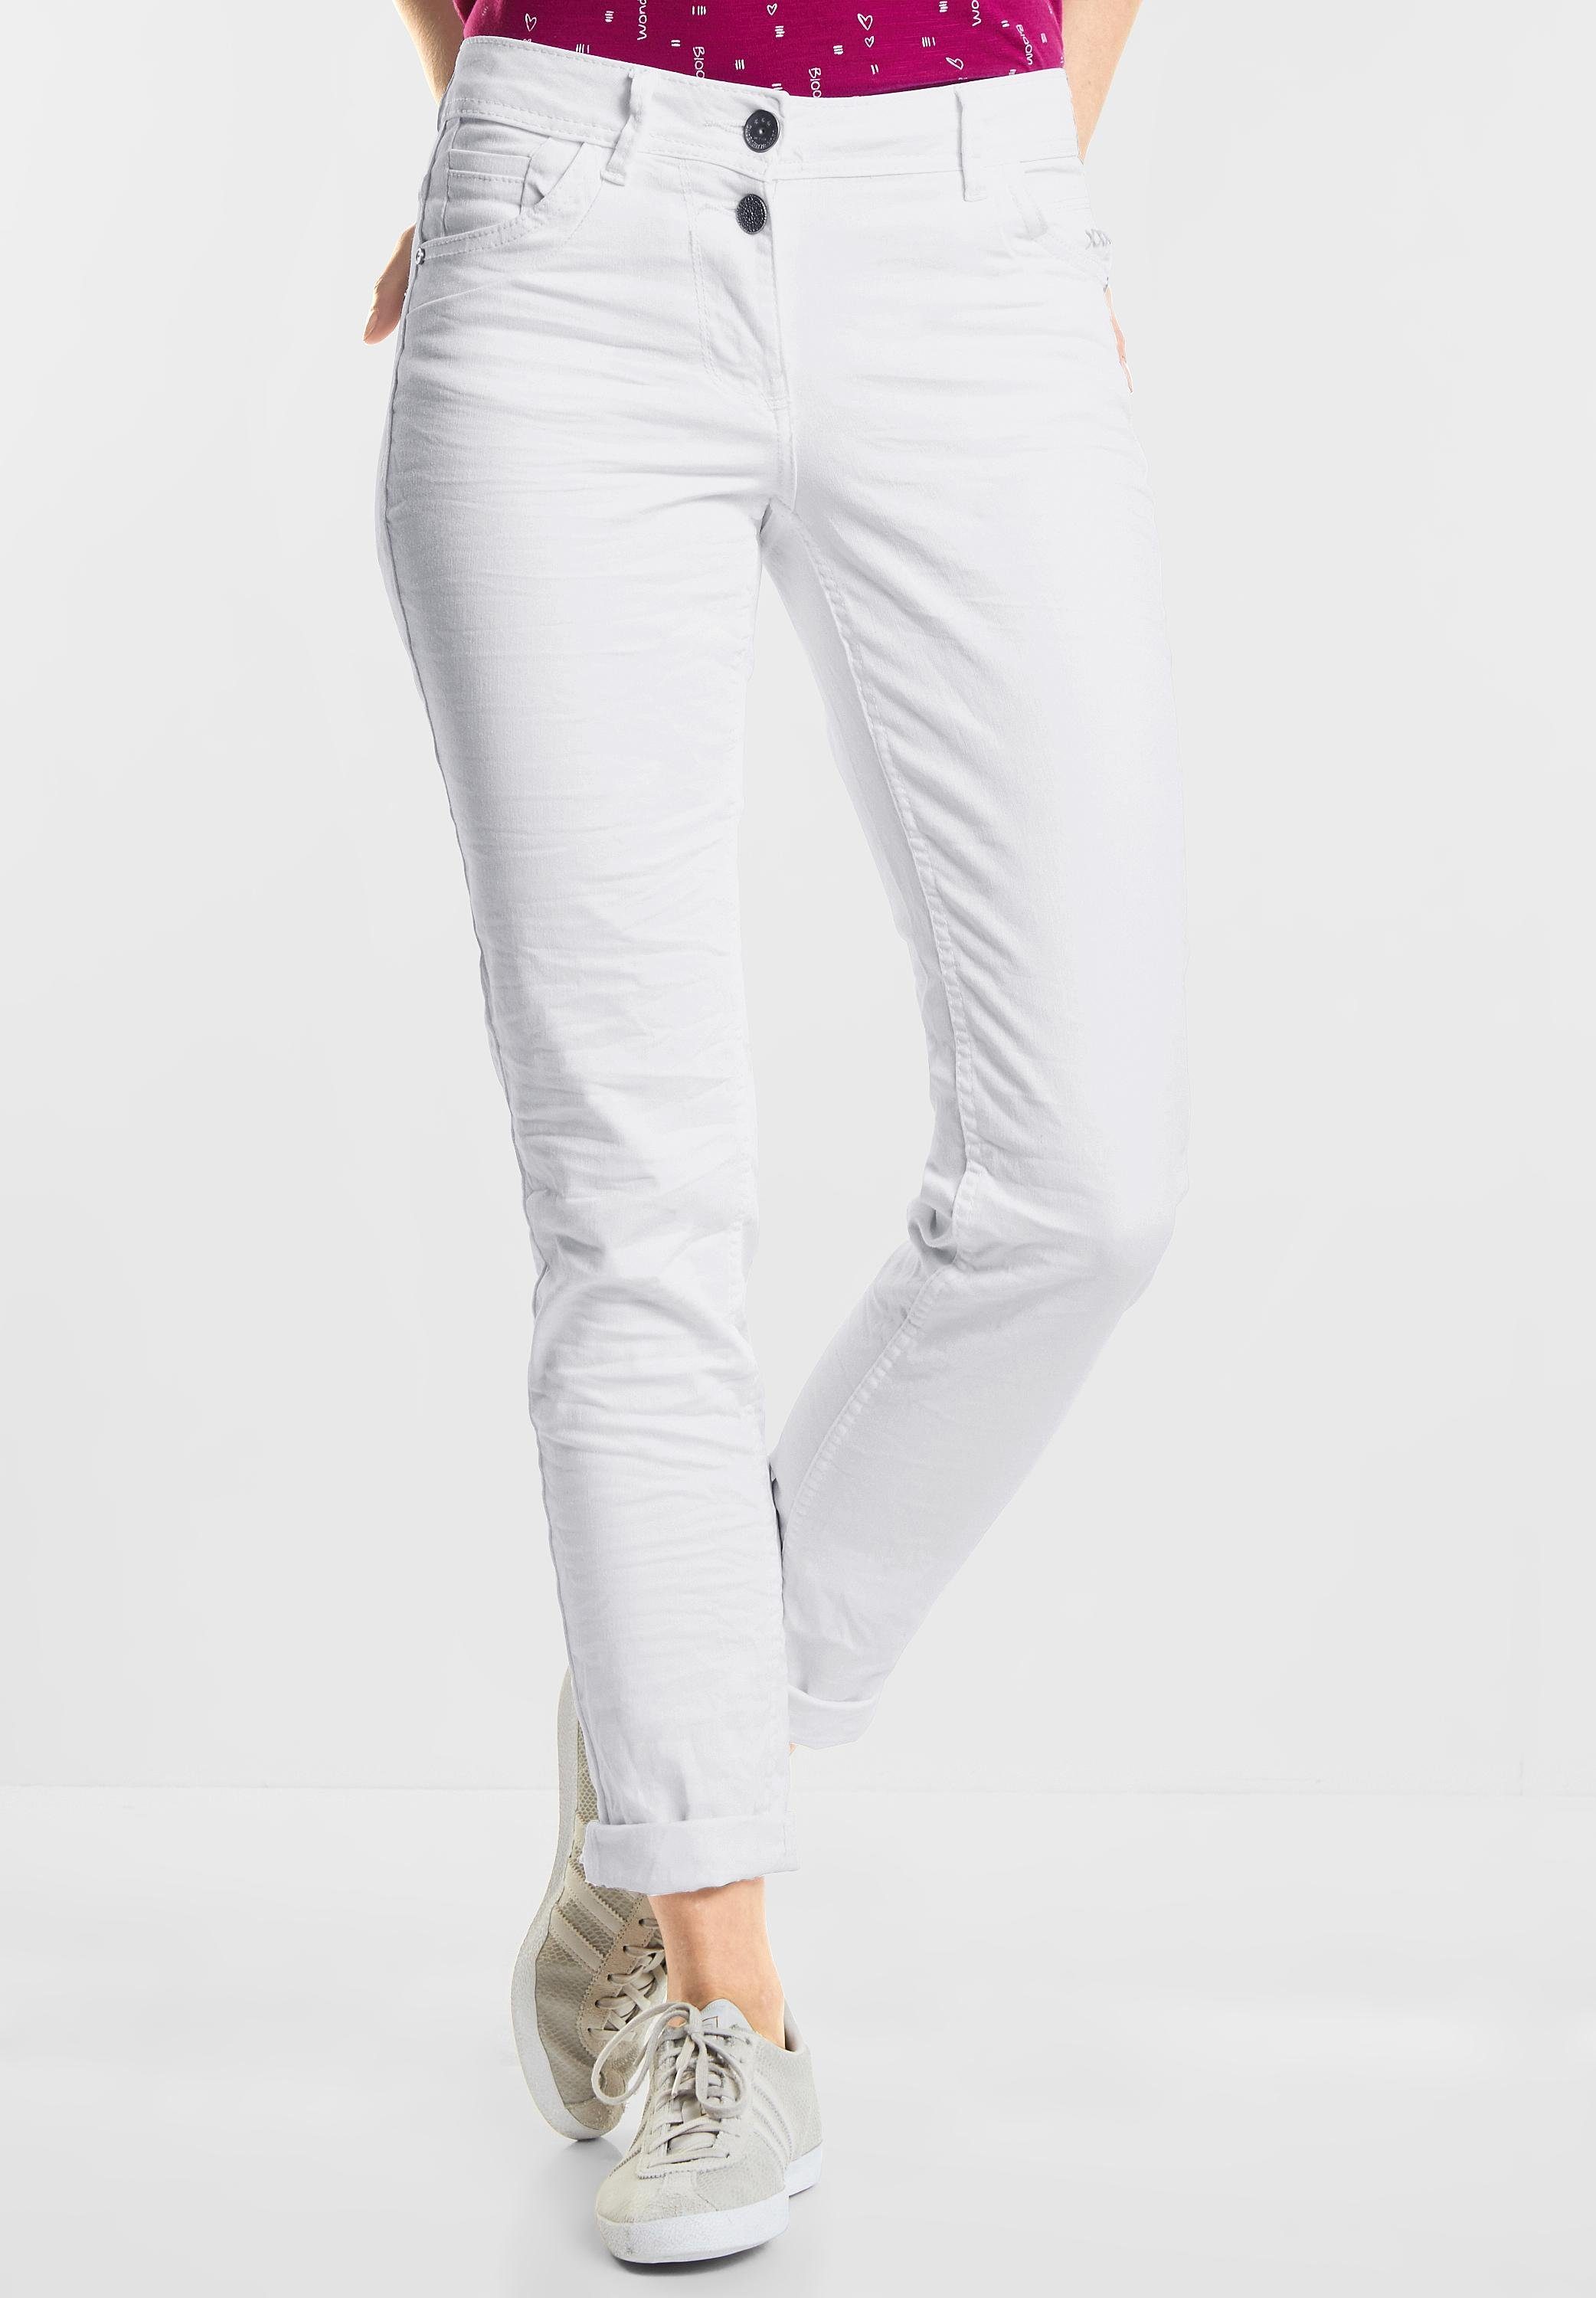 Otto - Cecil NU 15% KORTING: CECIL Tapered jeans Scarlett